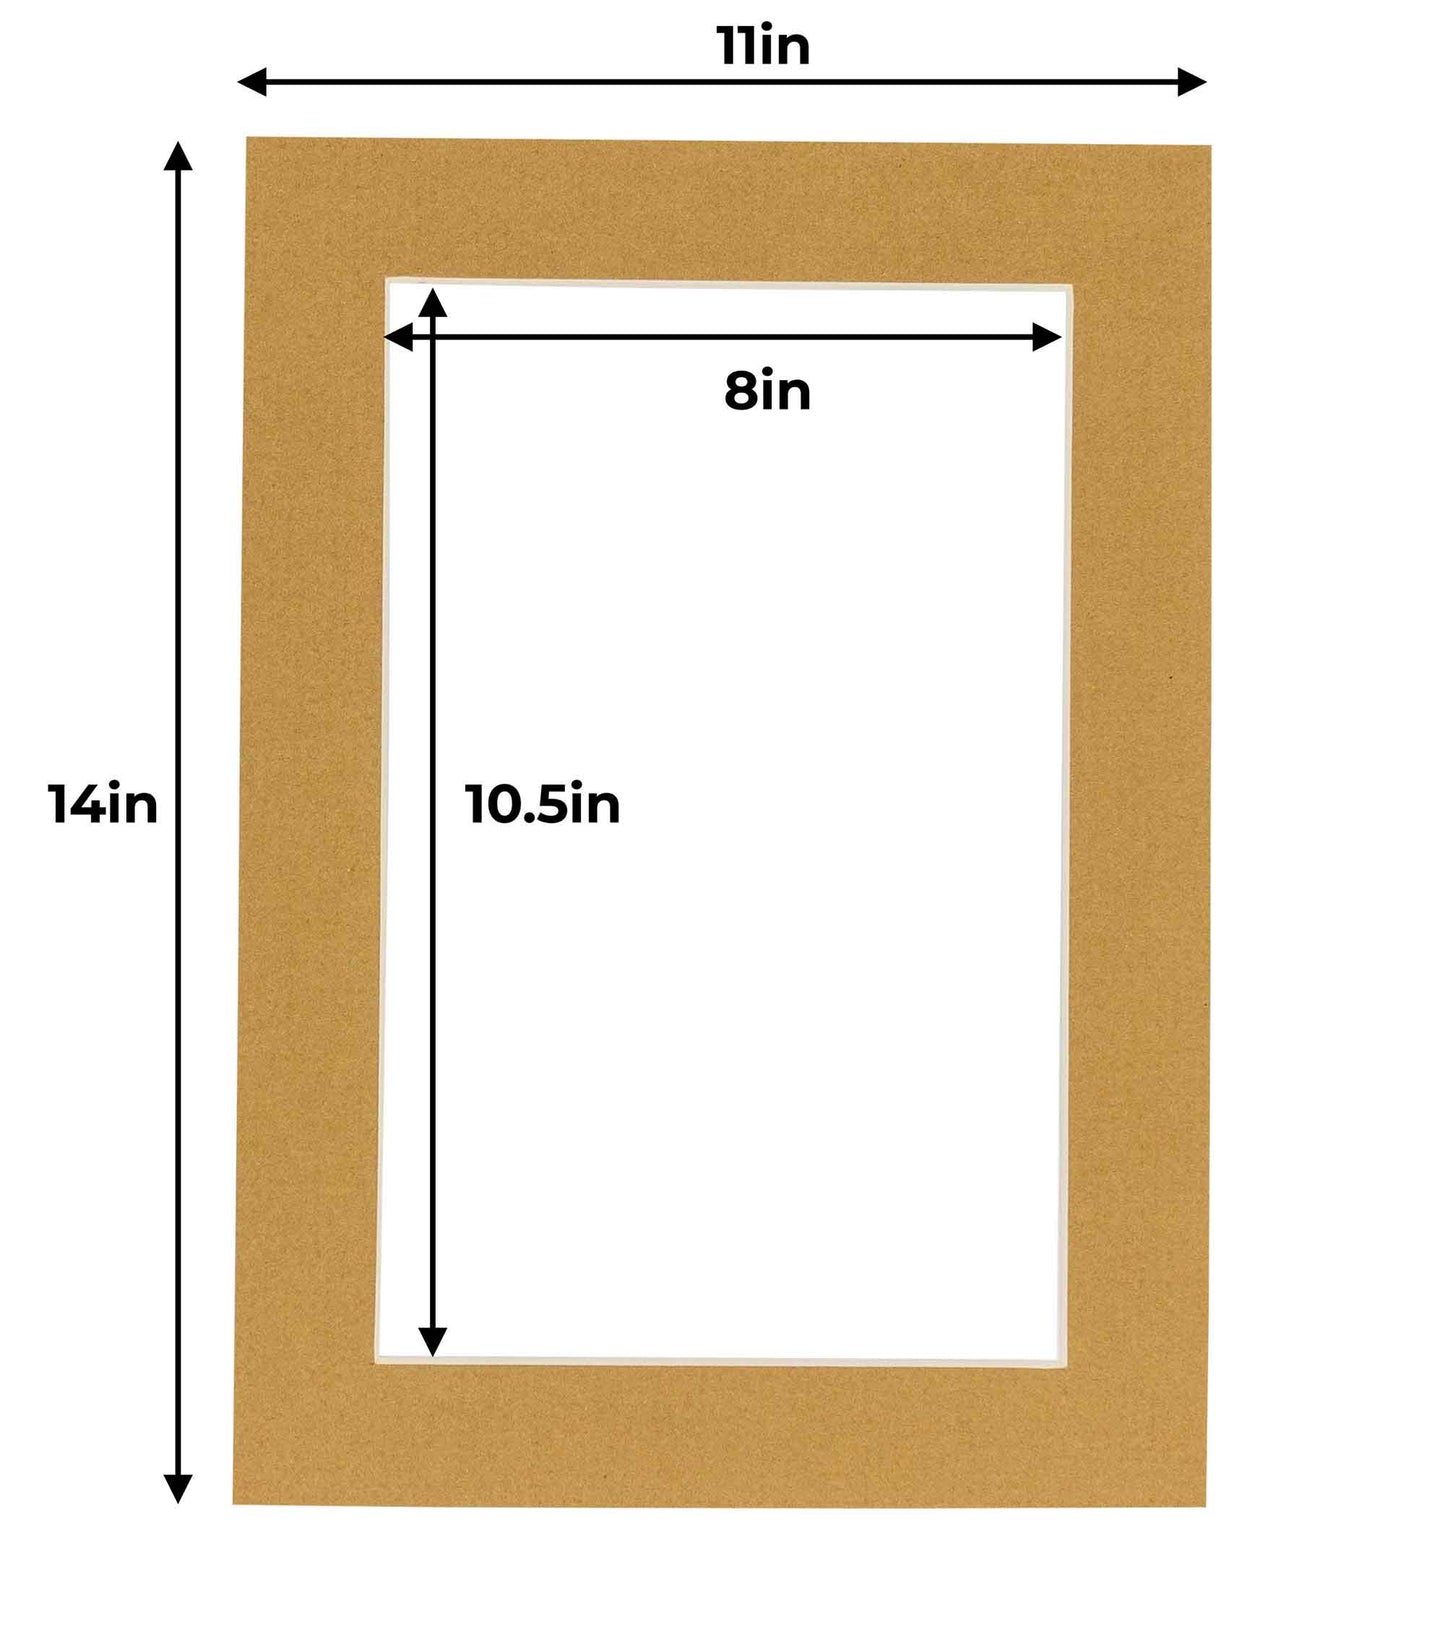 Pack of 25 Rattan Beige Precut Acid-Free Matboard Set with Clear Bags & Backings